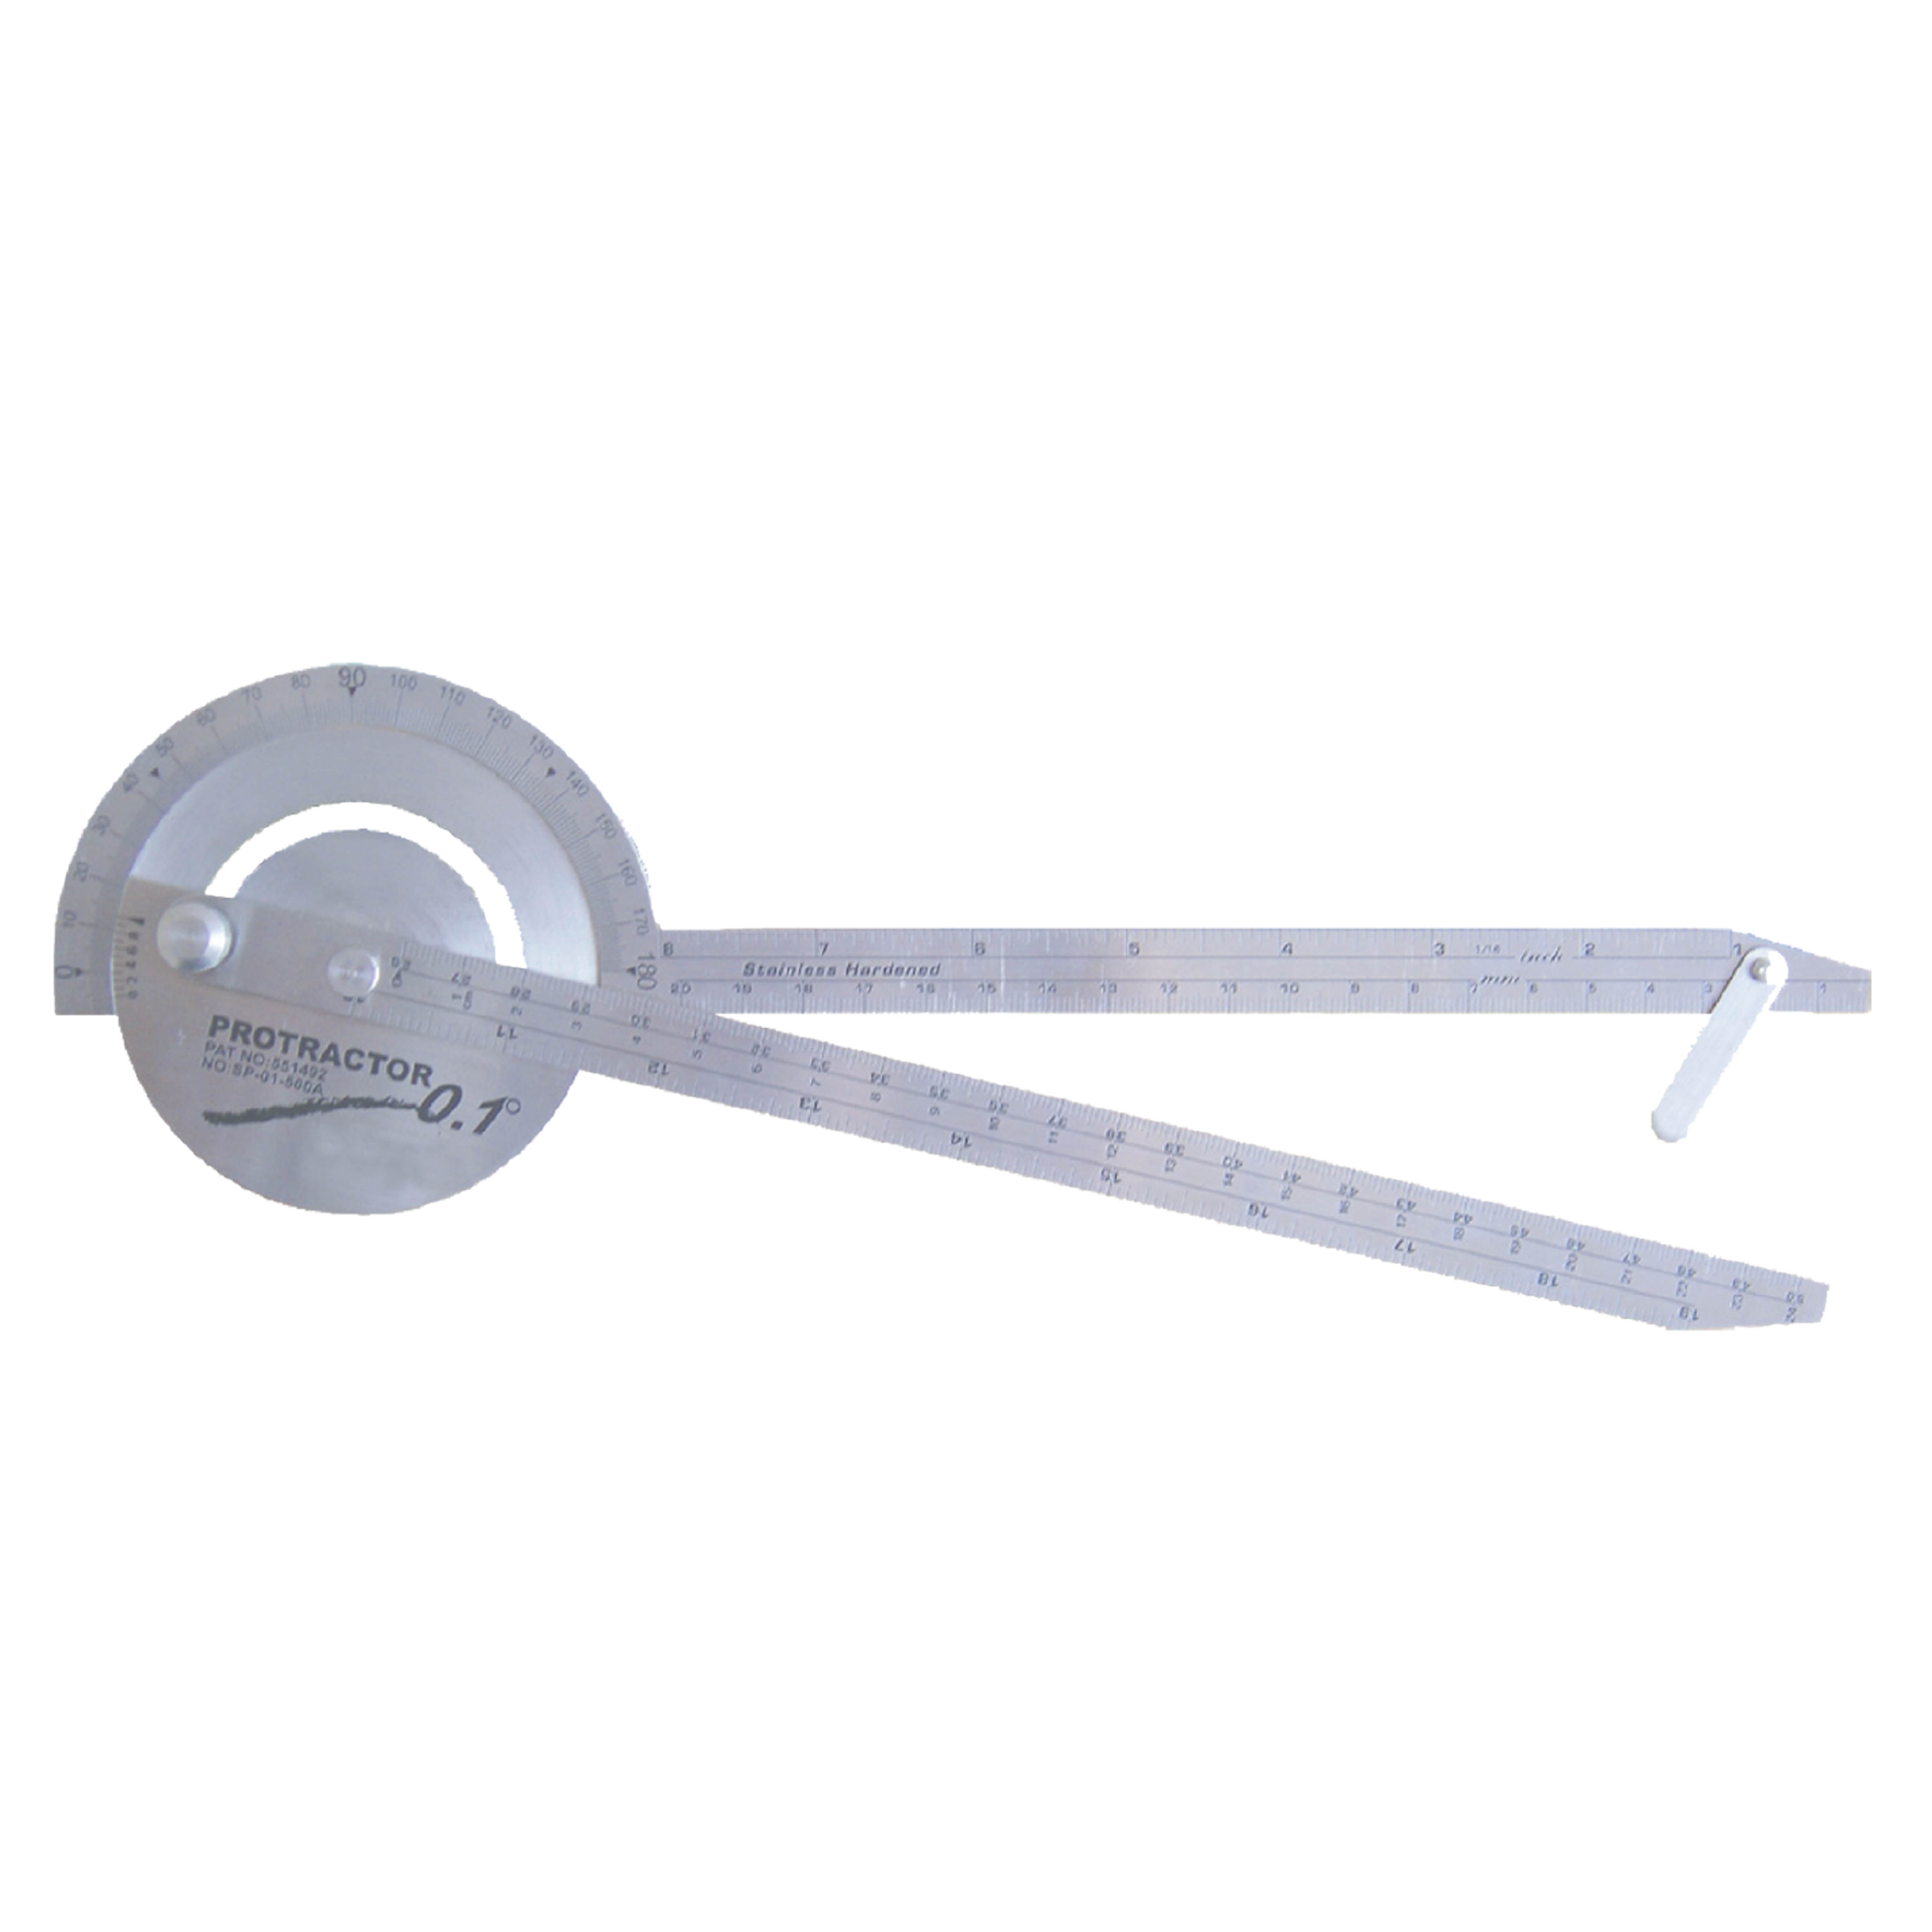 BEMATO STAINLESS STEEL PROTRACTOR